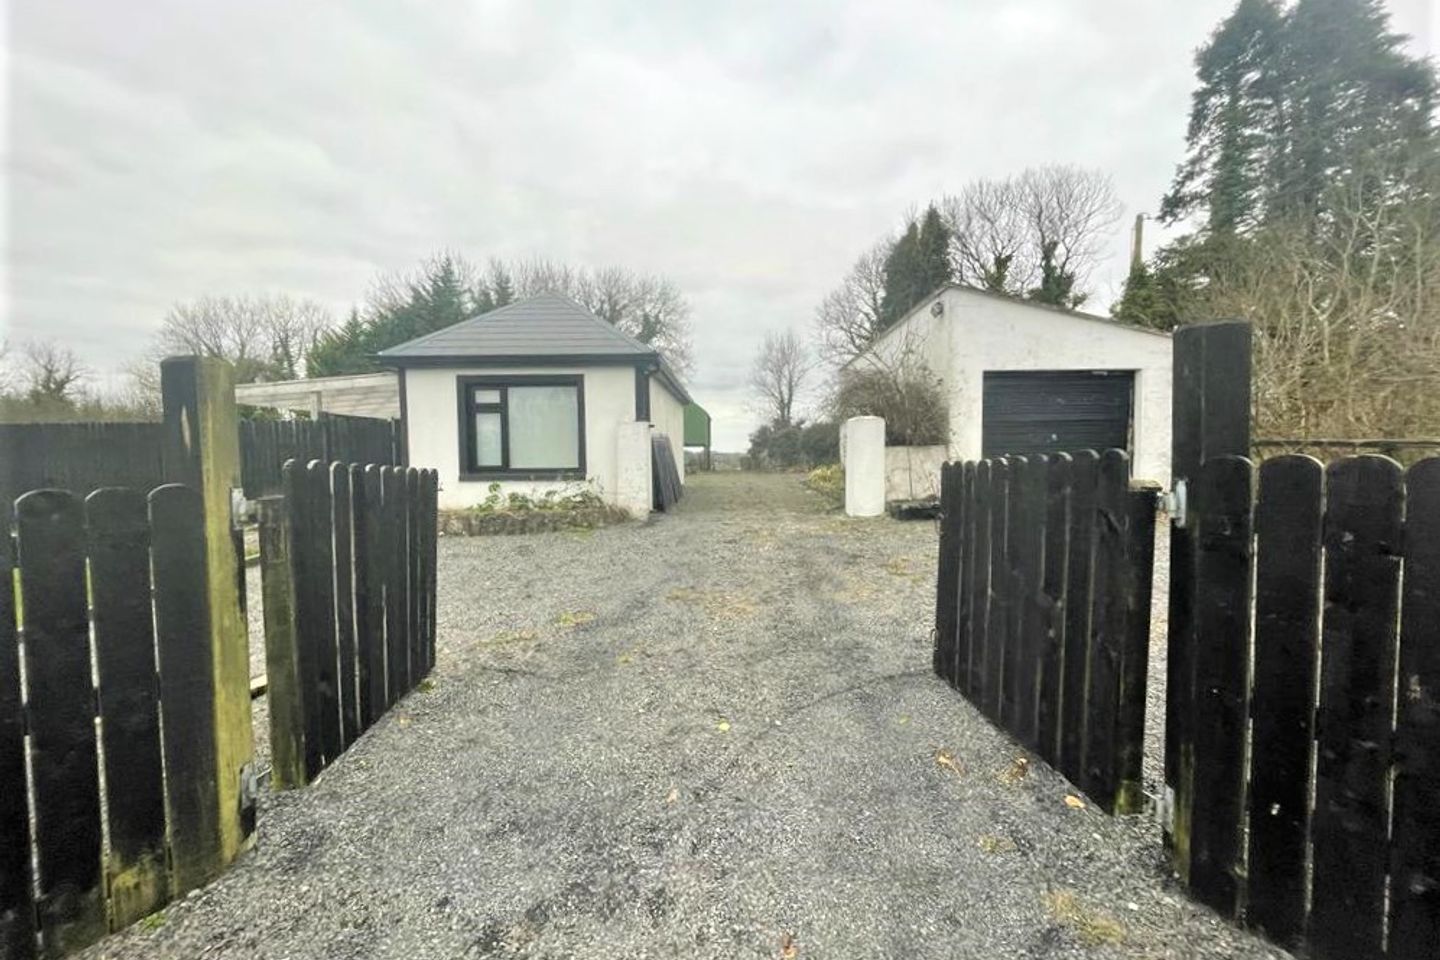 Sylaun East, Dunmore, Co. Galway, H54C972